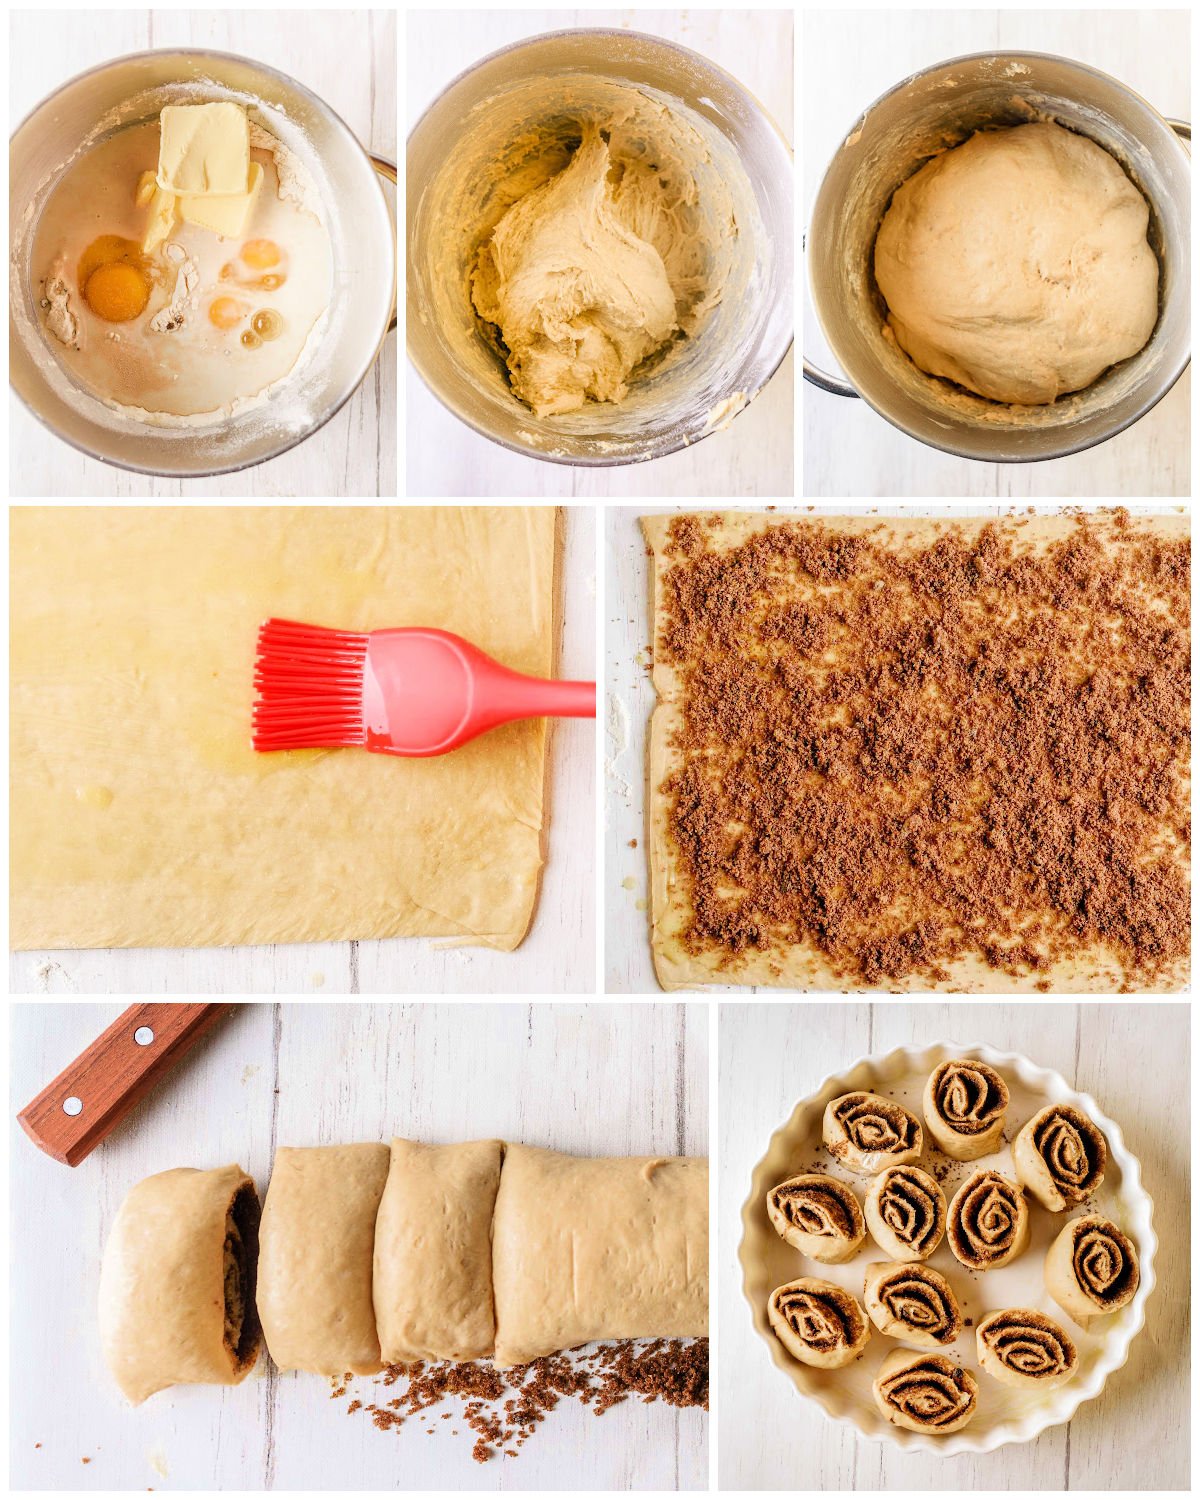 seven image collage showing step by step how to make cinnamon rolls.